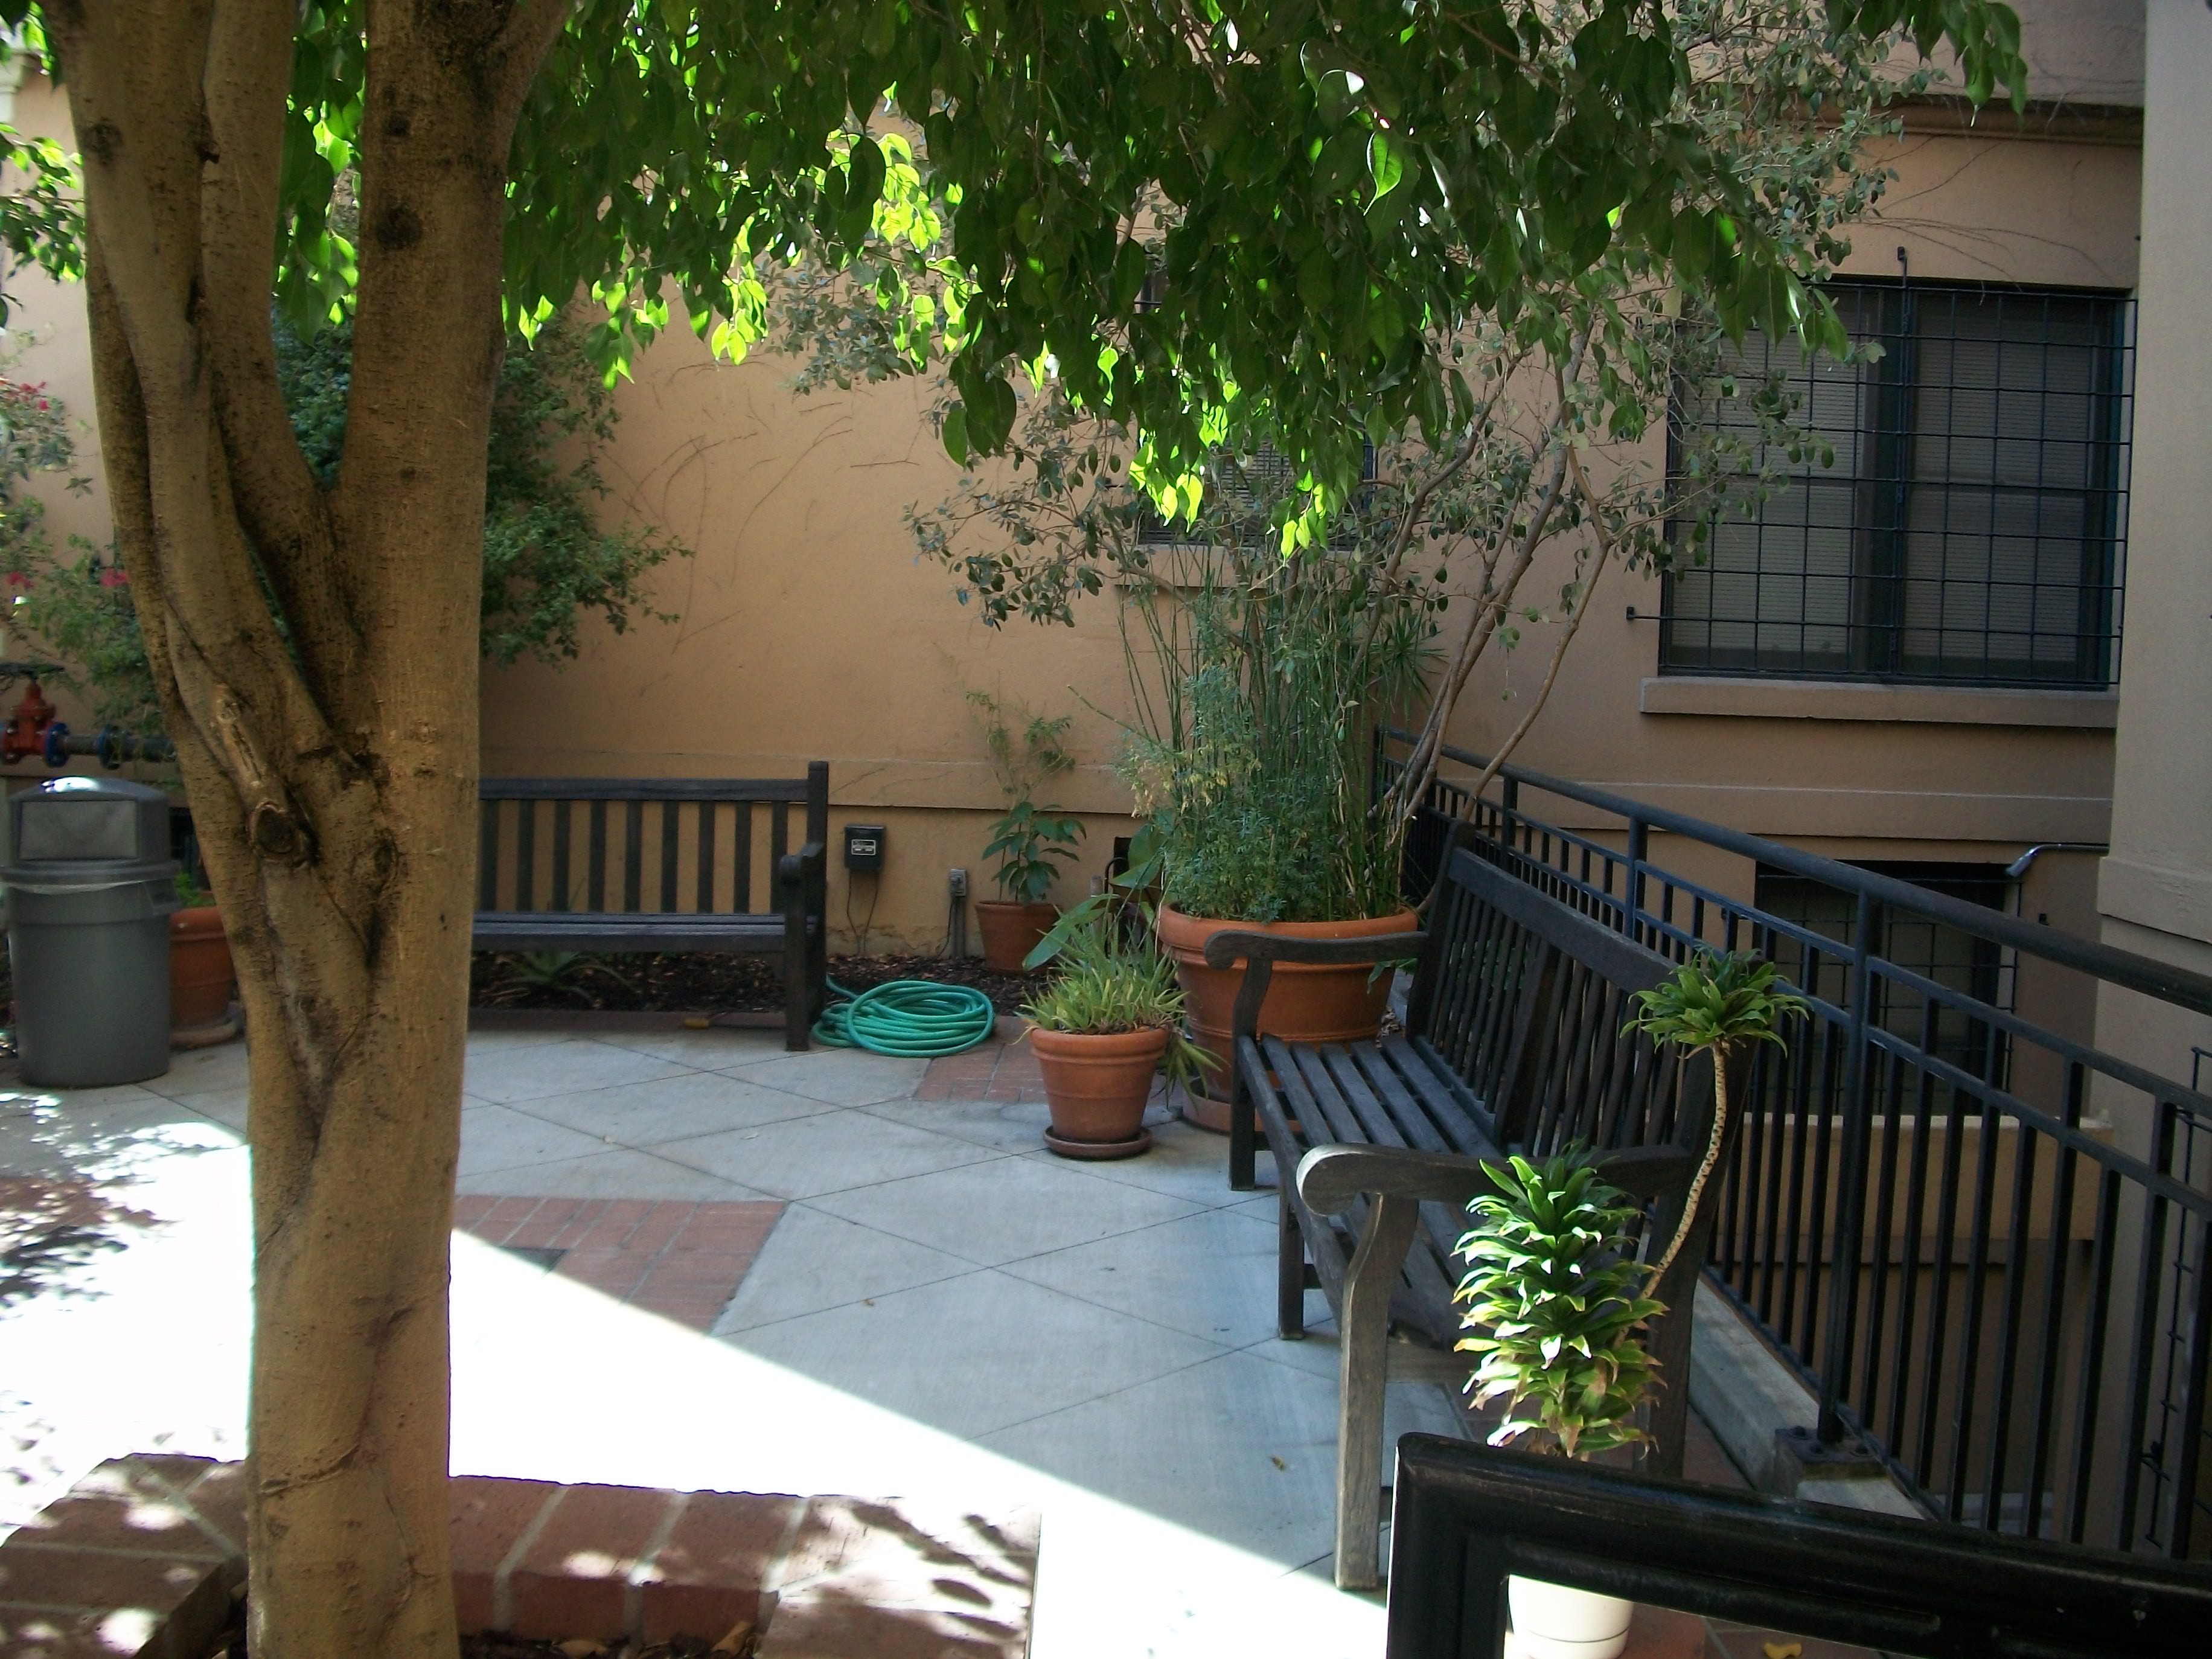 Exterior view of the Courtyard at the Young Apartments. Large tree with benches along the wall and railings and potted plants